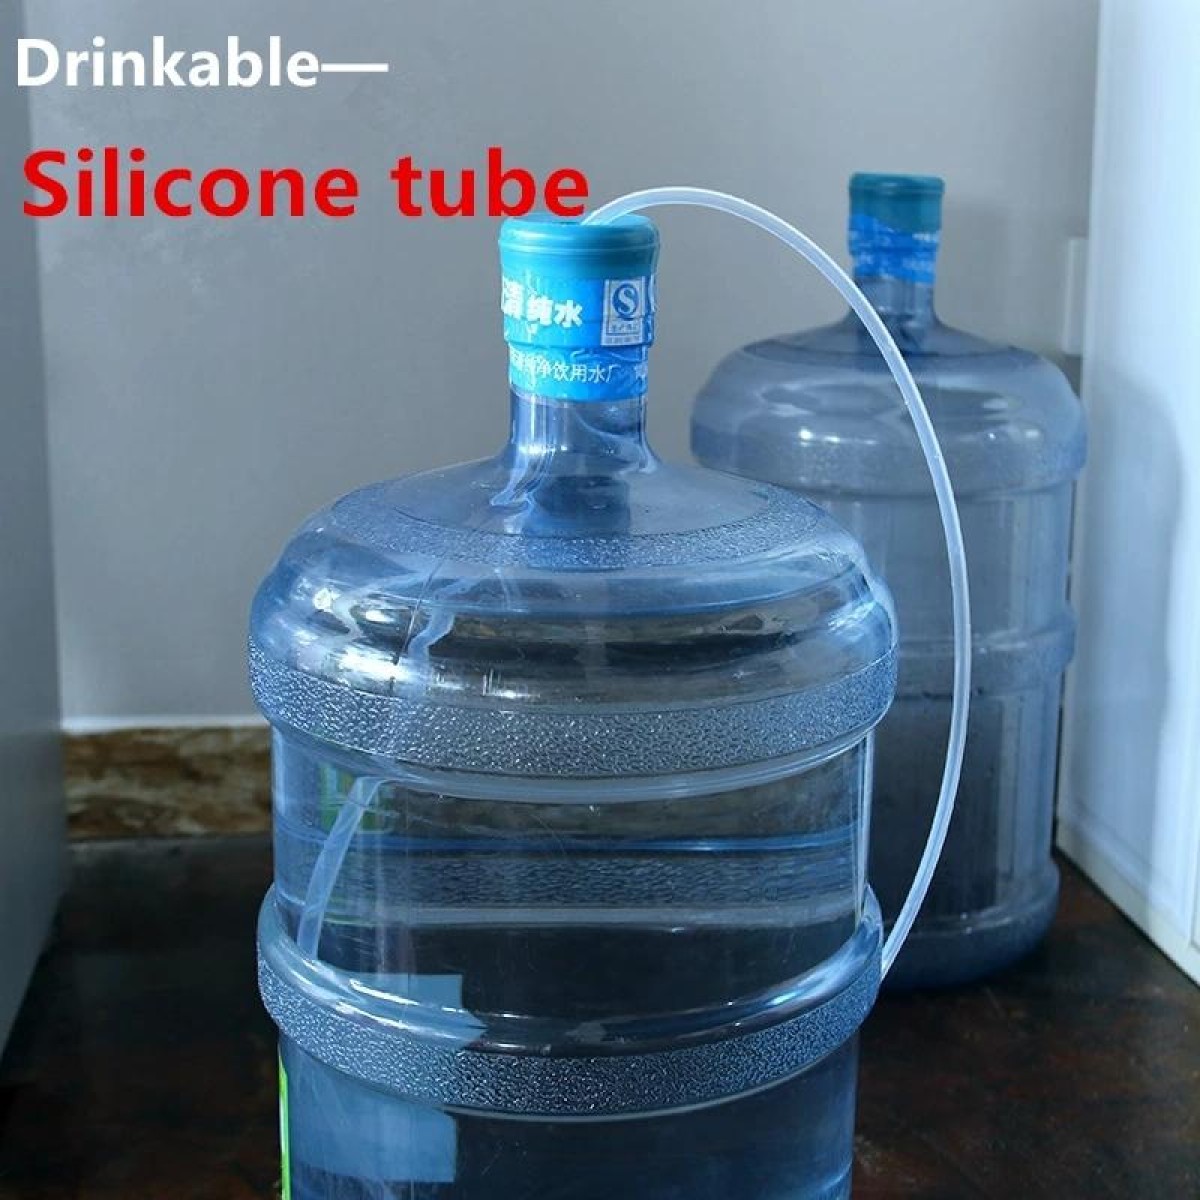 Food Grade Transparent Silicone Rubber Hose Out Diameter Flexible Silicone Tube, Specification:12x16mm(1m)